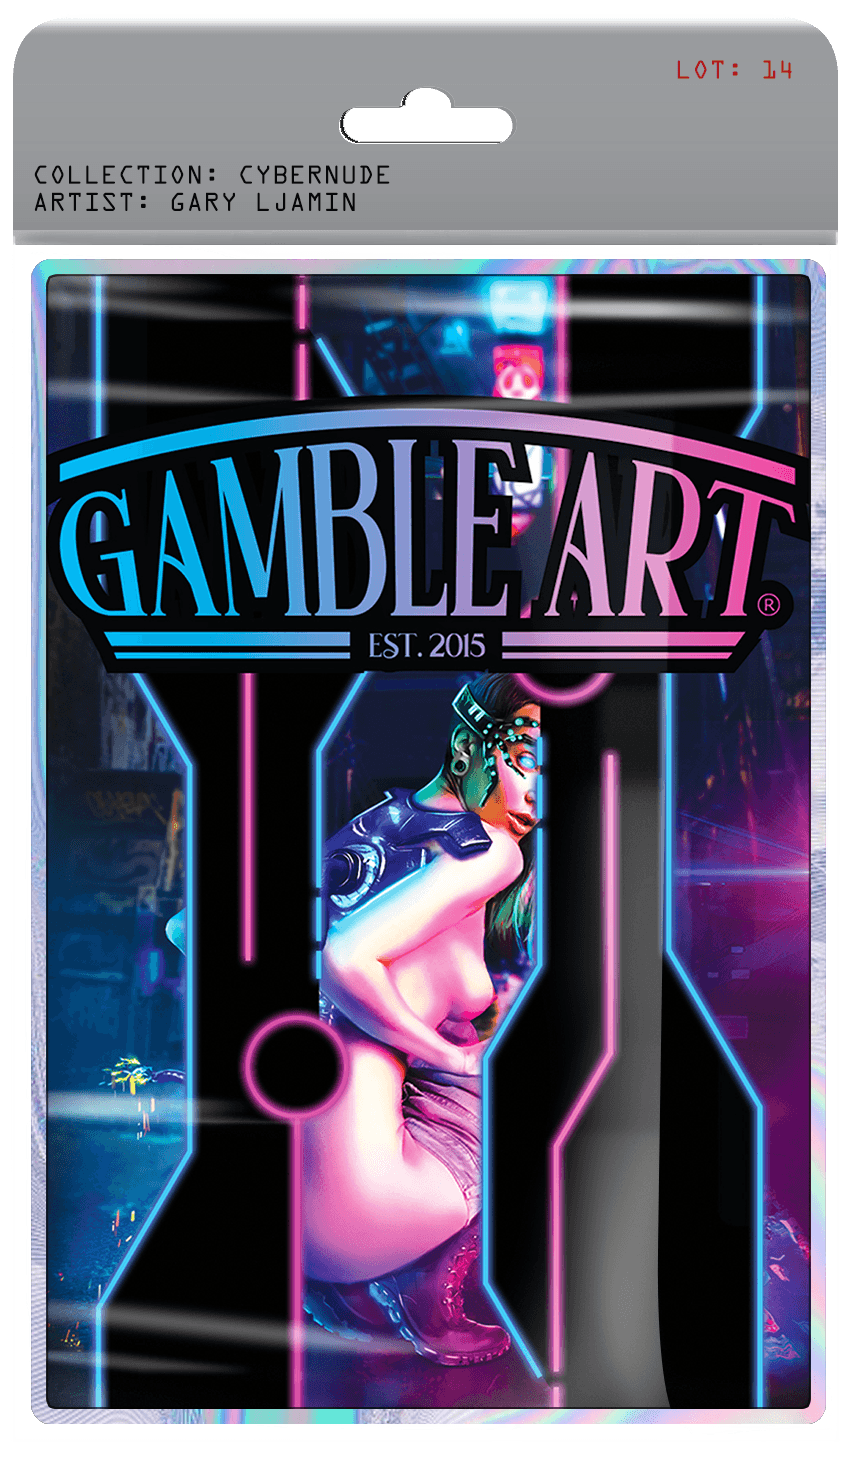 Cybernude playing cards - NFT token - SPECIAL